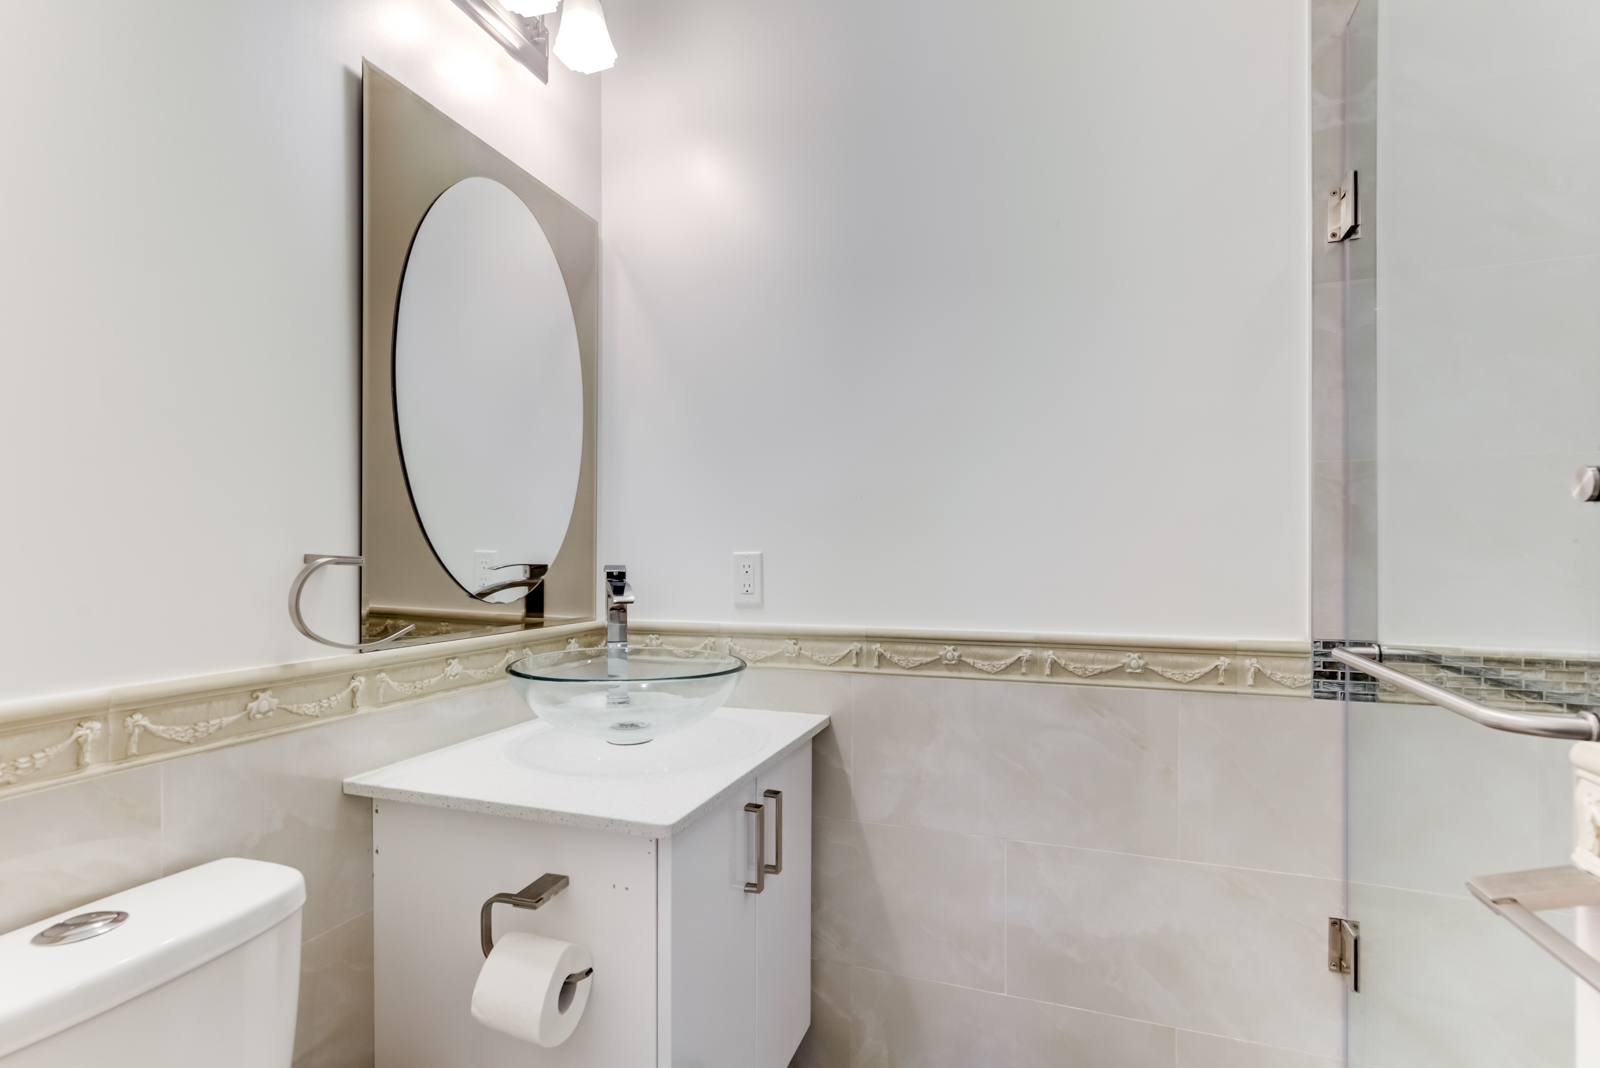 Renovated bathroom at 120 McGill St with white vanity, oval mirror and walk-in shower.